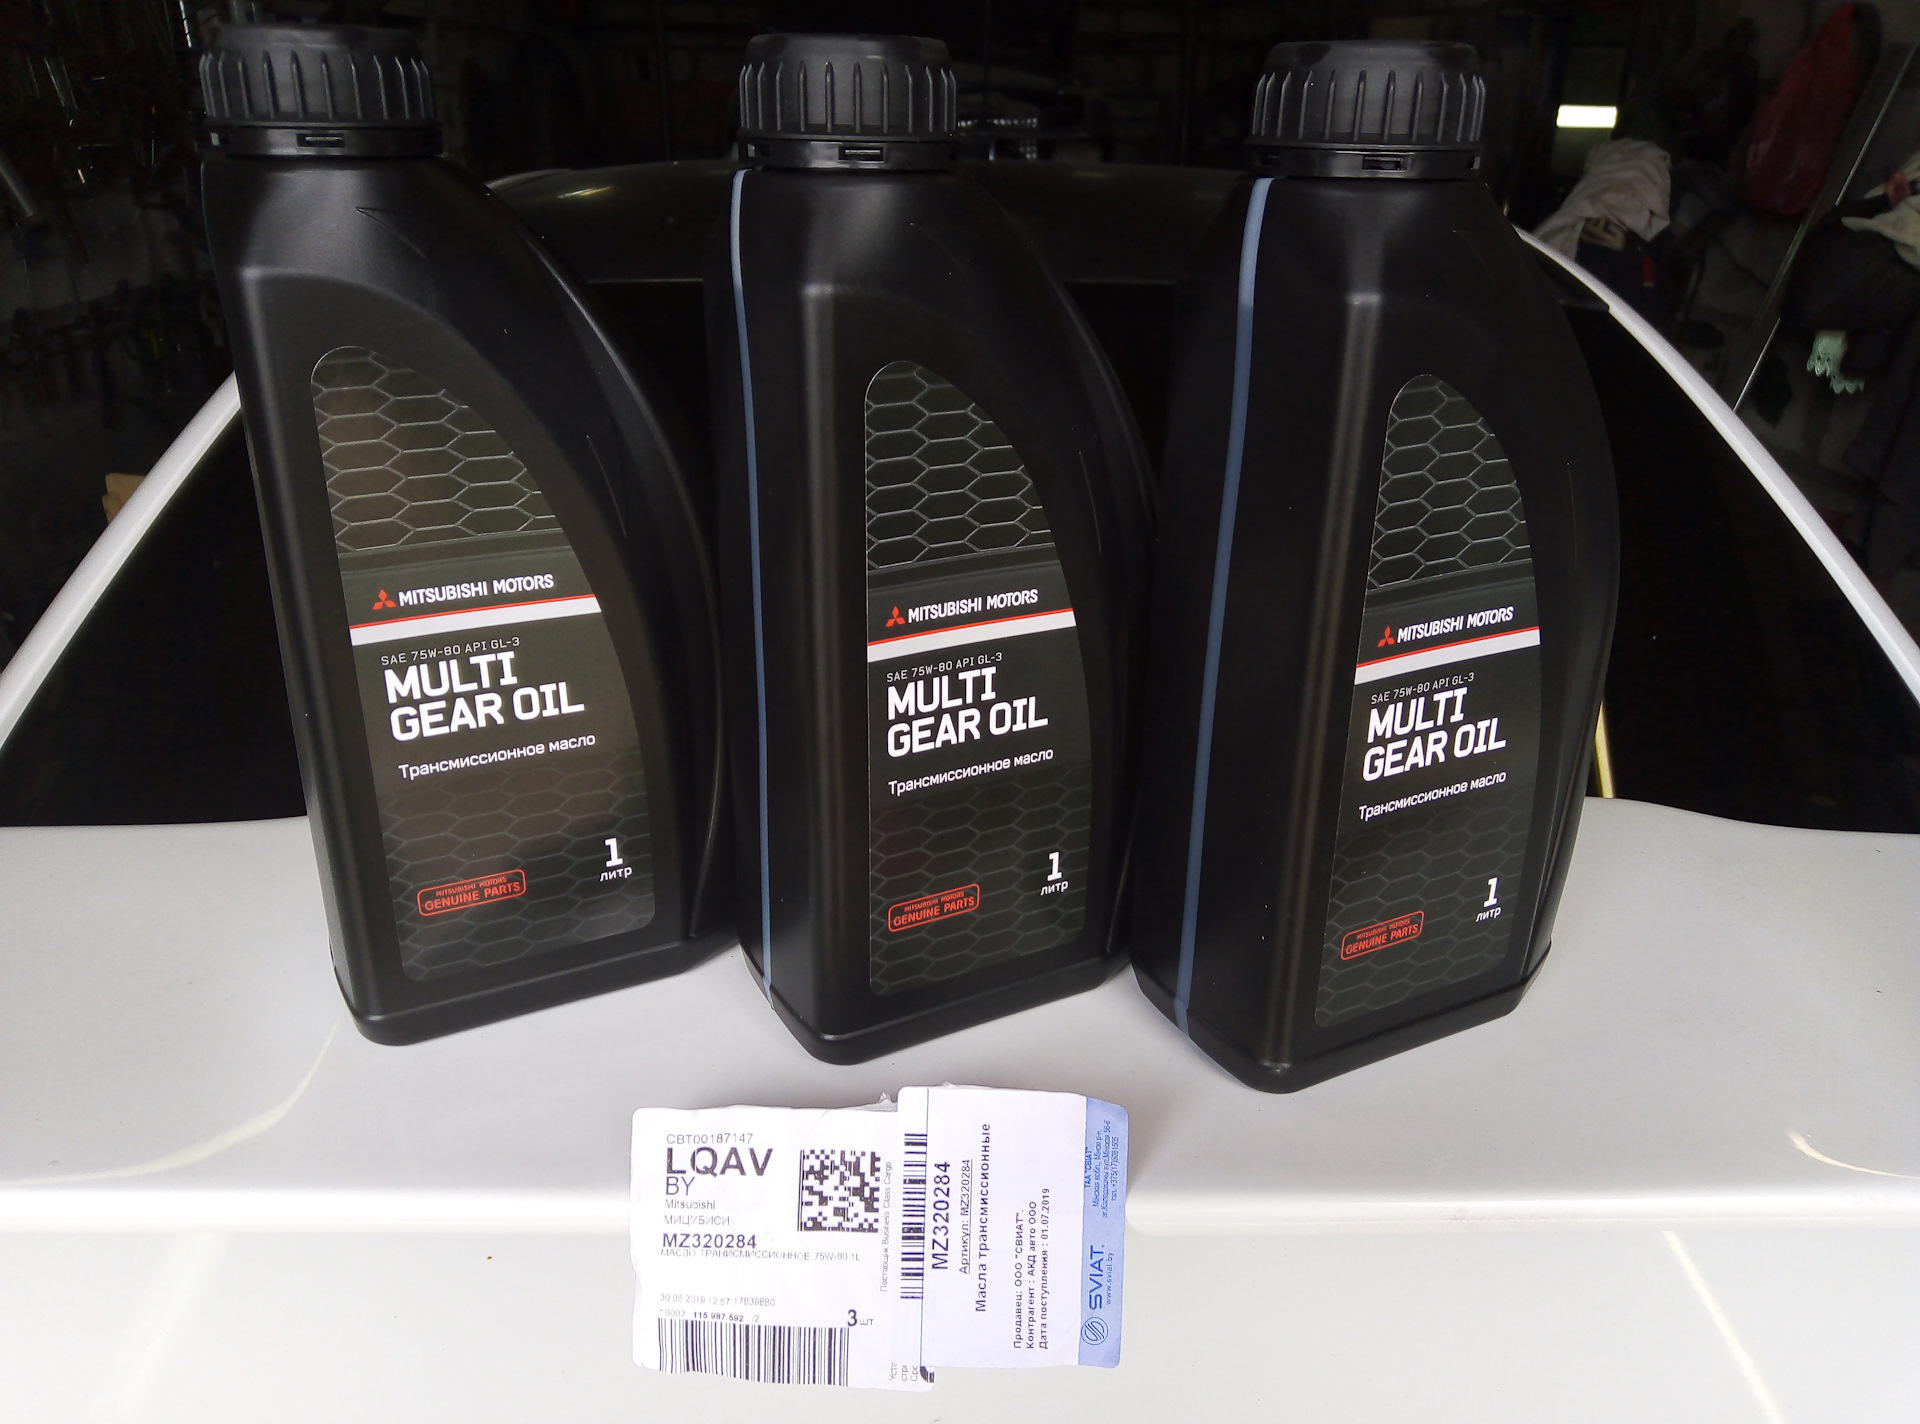 Lancer x масло. Multi Gear Oil 75w-80 Mitsubishi. Mitsubishi MZ 320284. Mz320744 Mitsubishi. Митсубиси лансе10 1.5 масло.